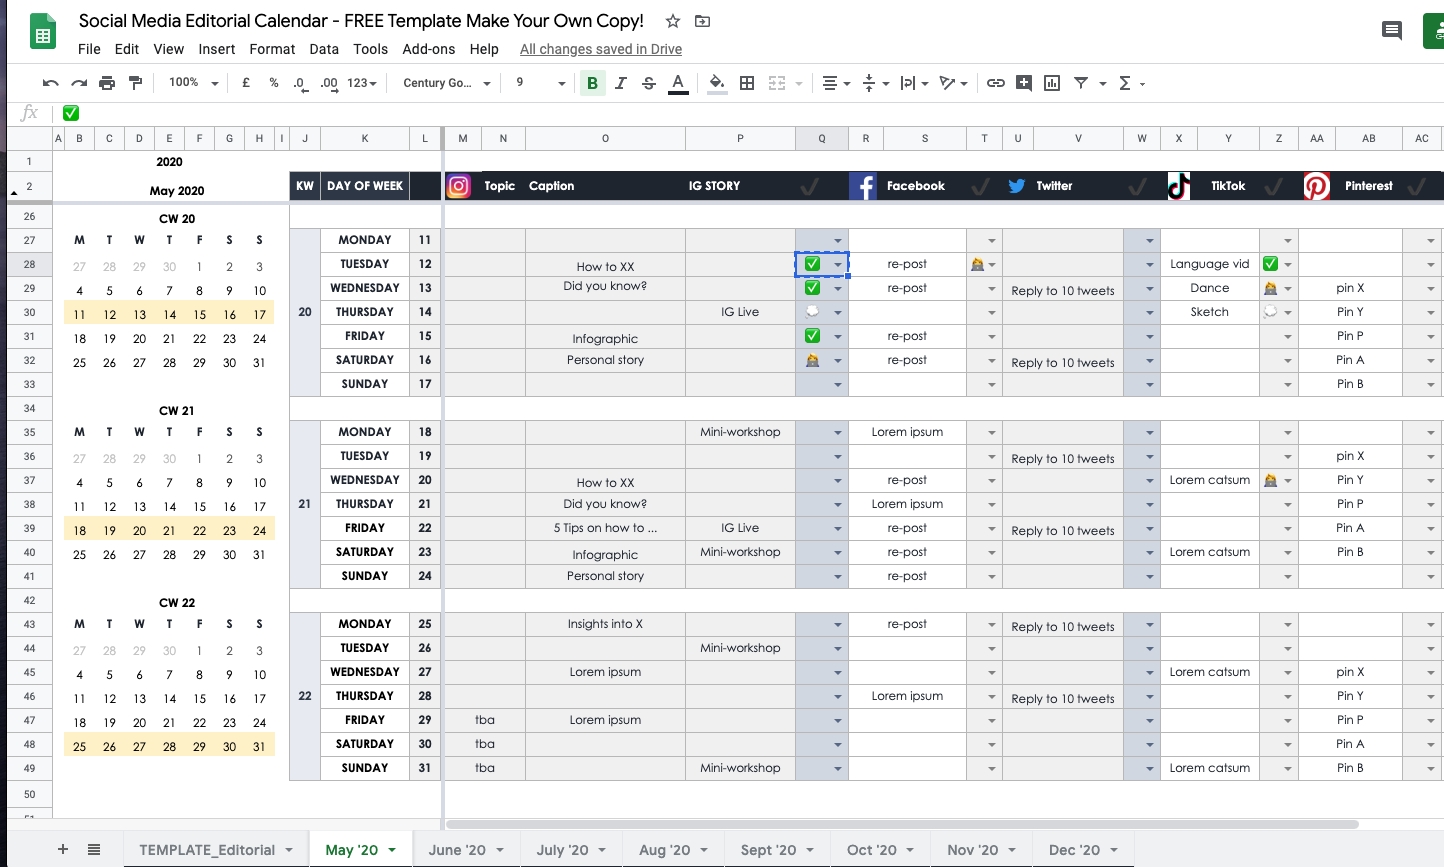 How To Plan Your Social Media In 2020 As An Individual Or Calendar Template Social Media